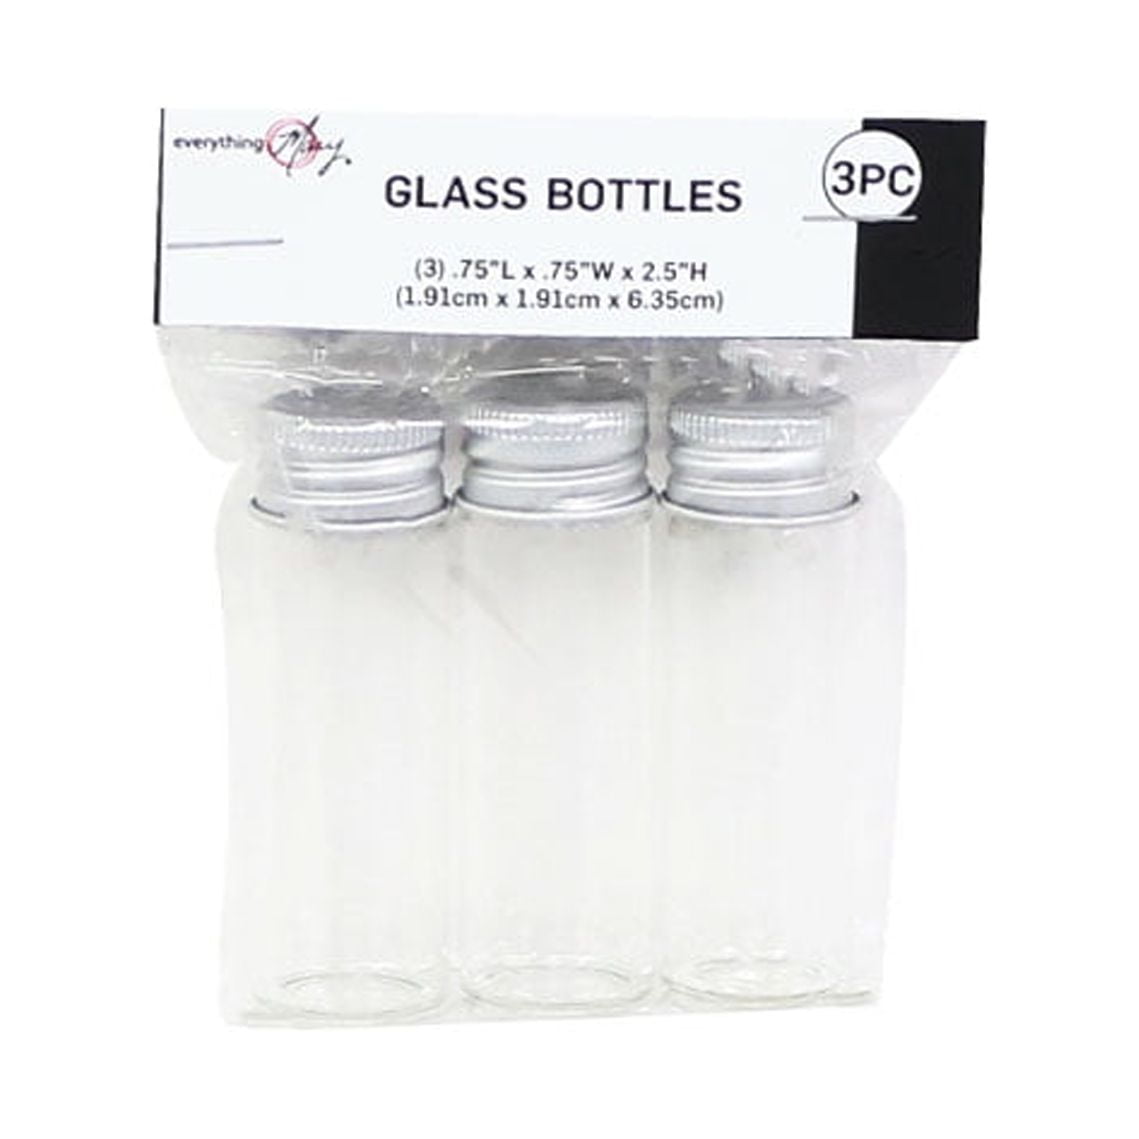 Everything Mary 1.5 Glass Bottles With Aluminum Lids 4pk